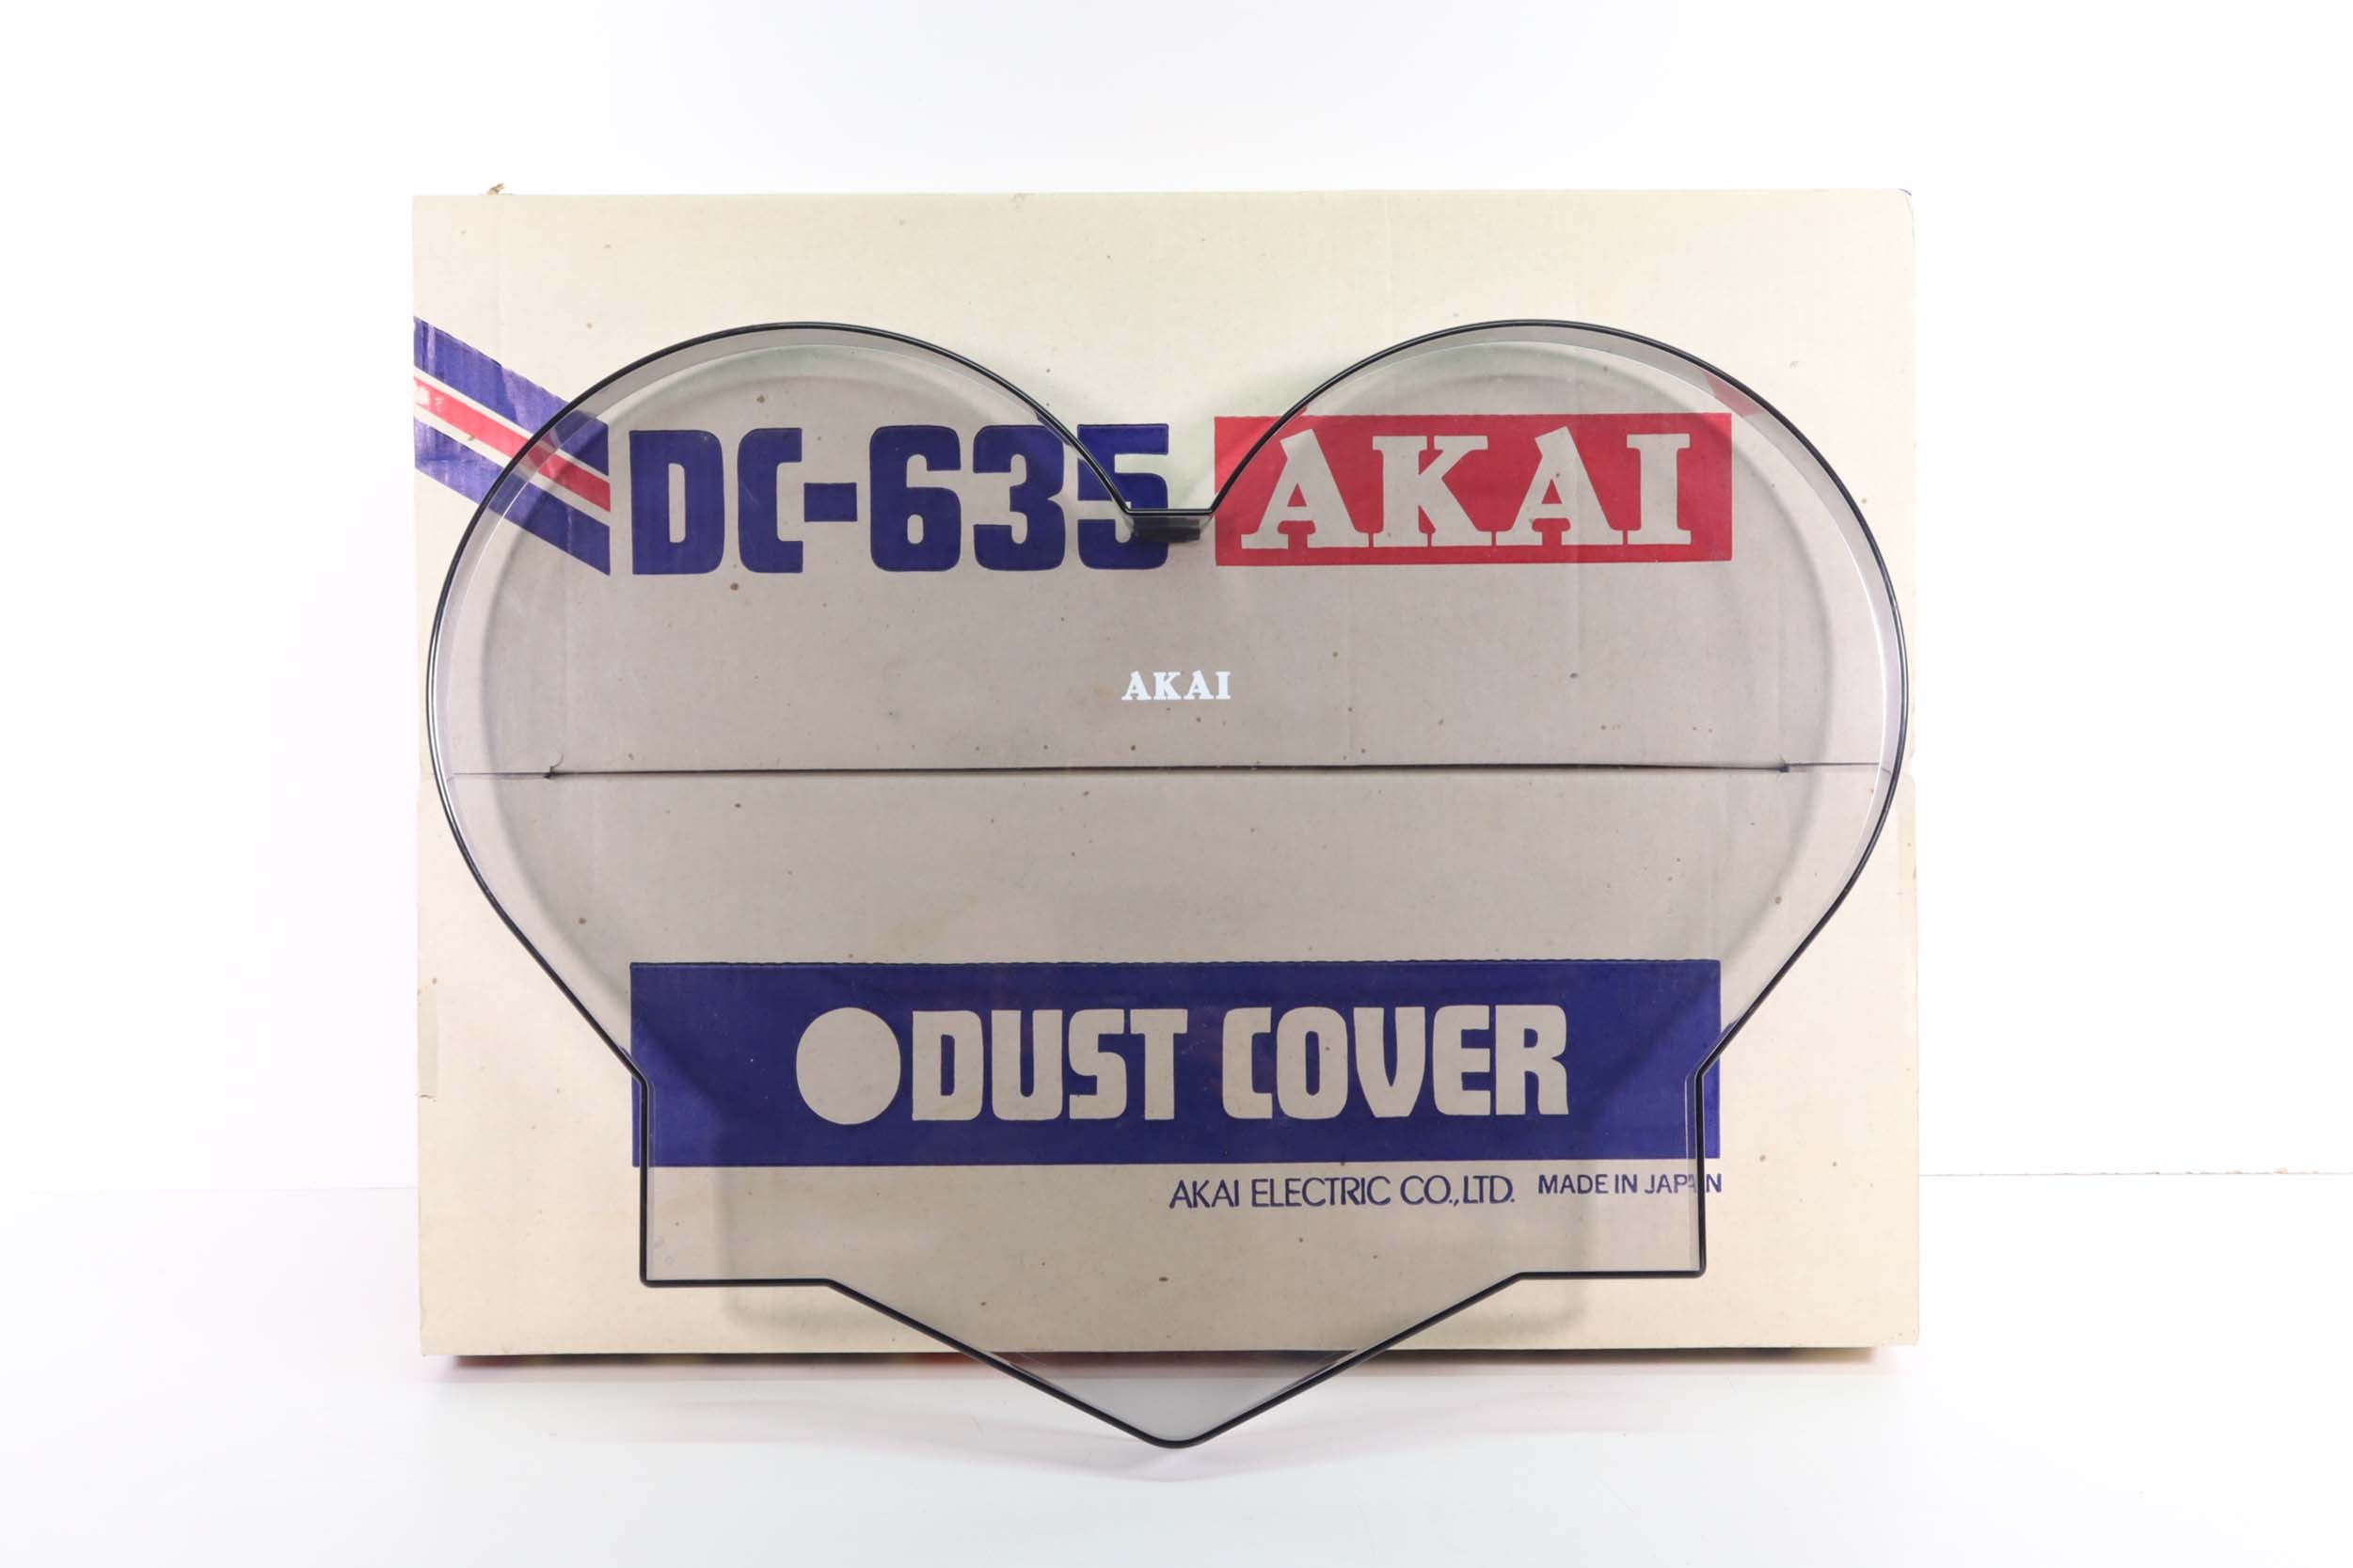 Akai DC-635 Dust Cover for Reel-To-Reel Deck GX-635 and More (with Original  Box)